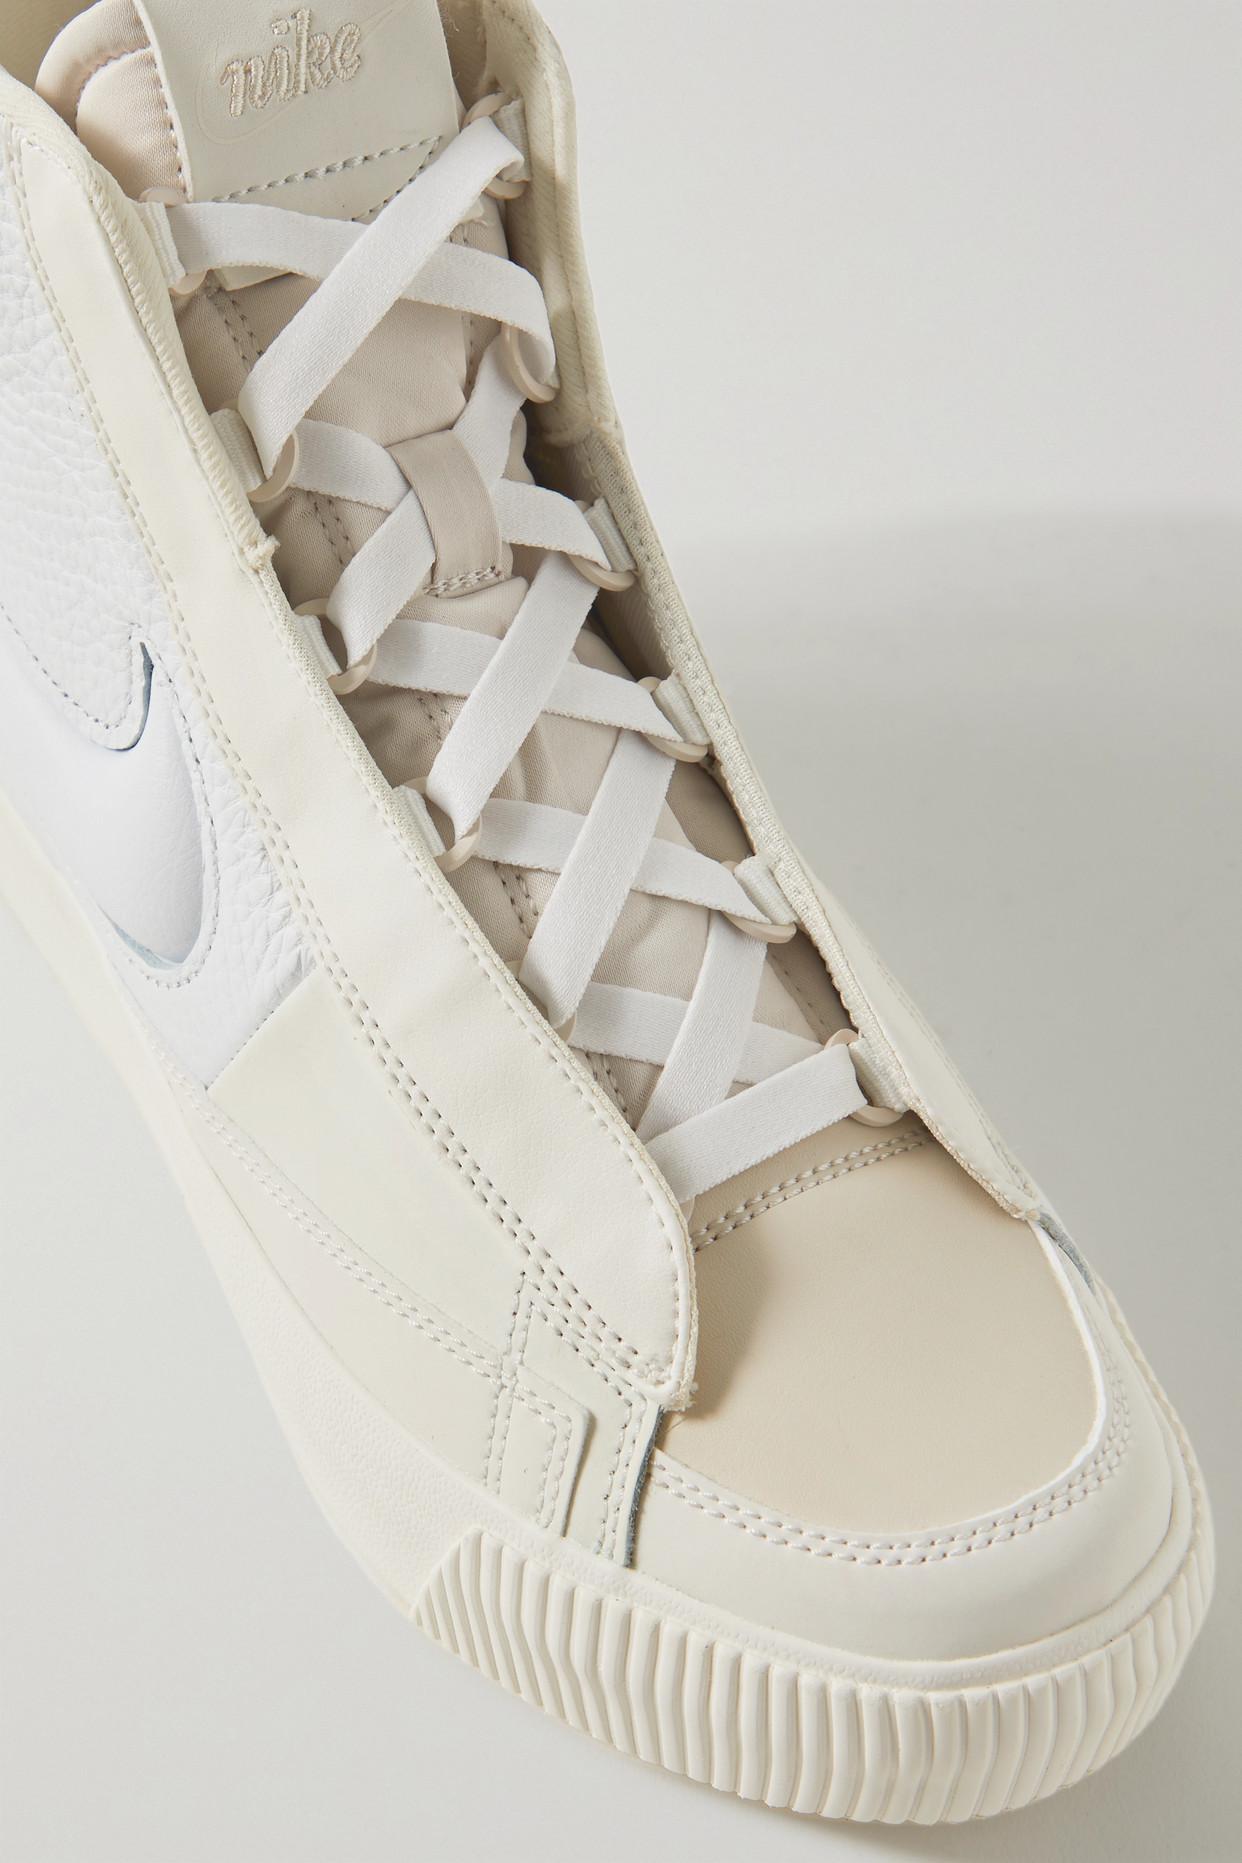 Nike Blazer Mid Victory Smooth And Textured-leather Sneakers in White | Lyst